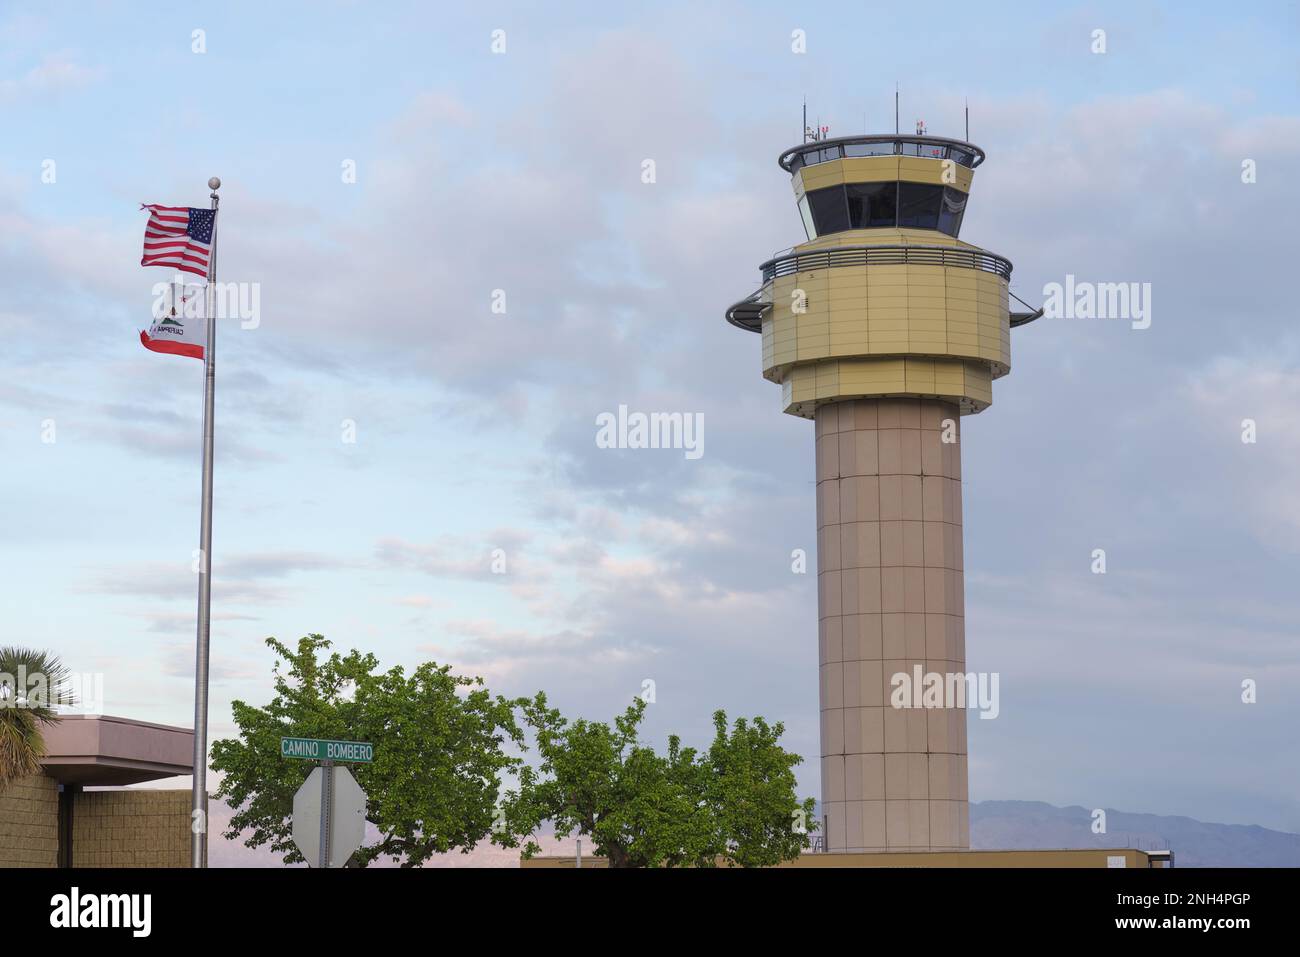 Palm Springs International Airport control tower shown in late afternoon. Stock Photo